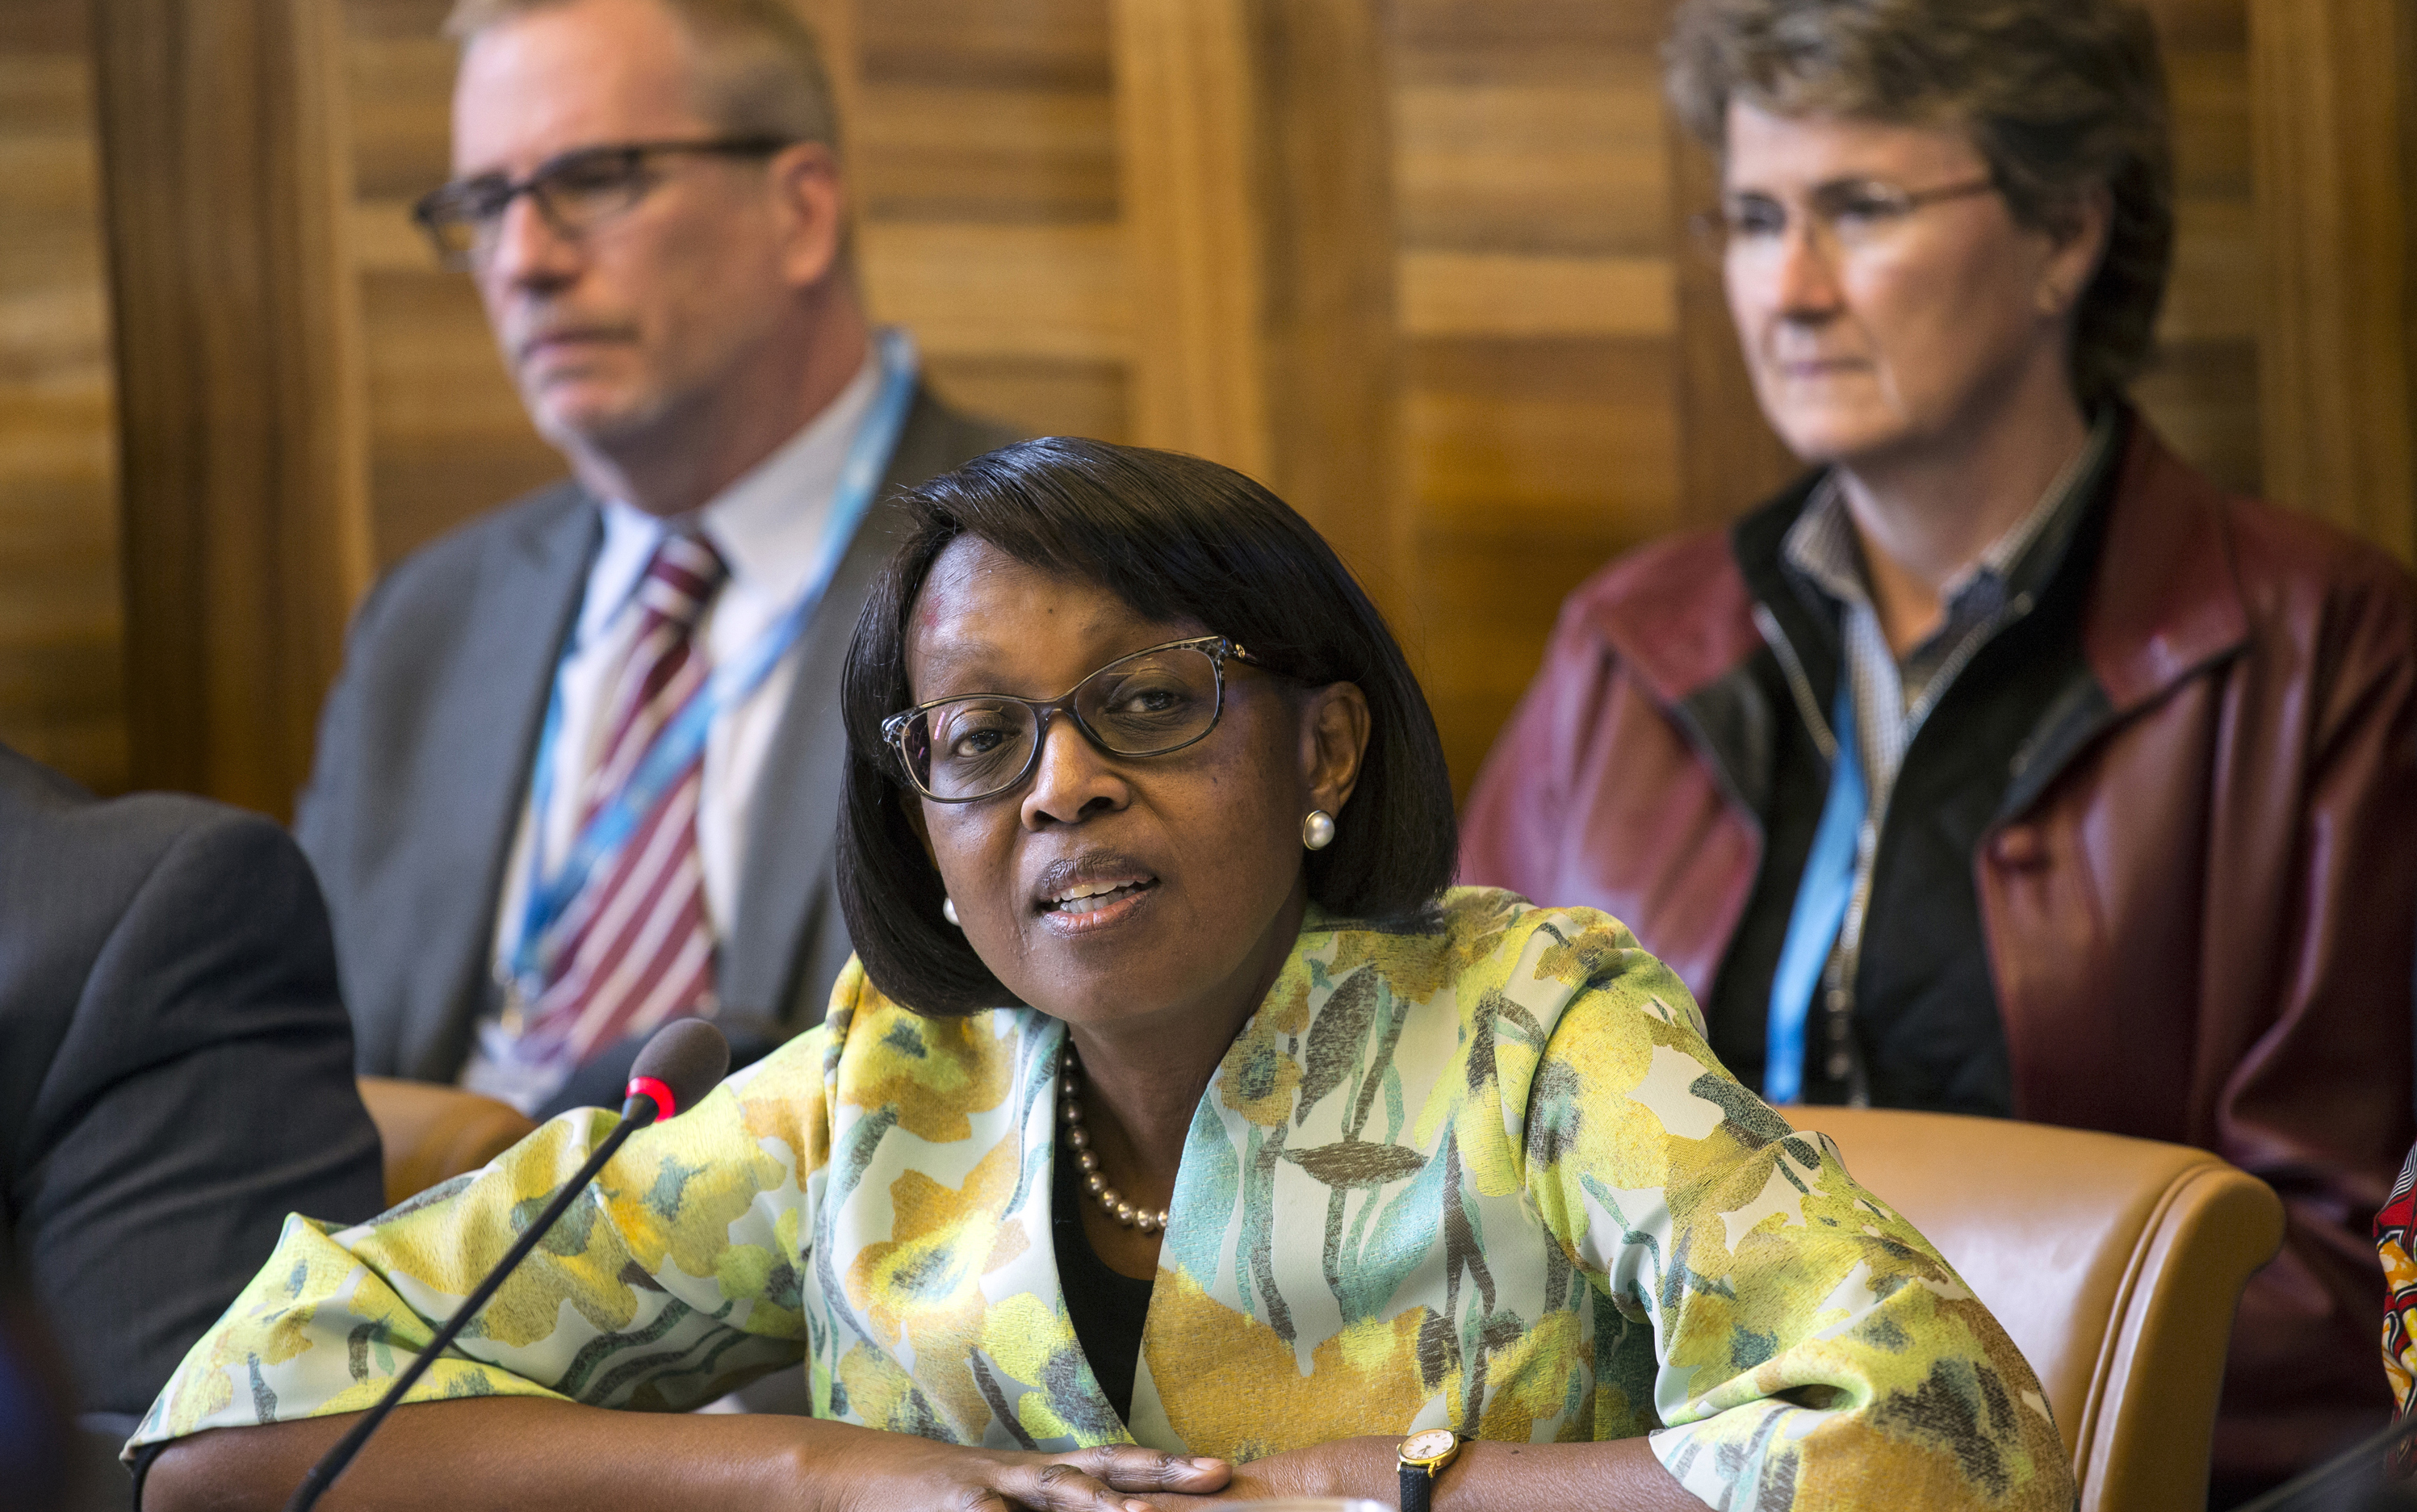 Dr Moeti at meeting of launch of ESPEN at World Health Assembly 2016. Image courtsey of WHO/ L. Cipriani